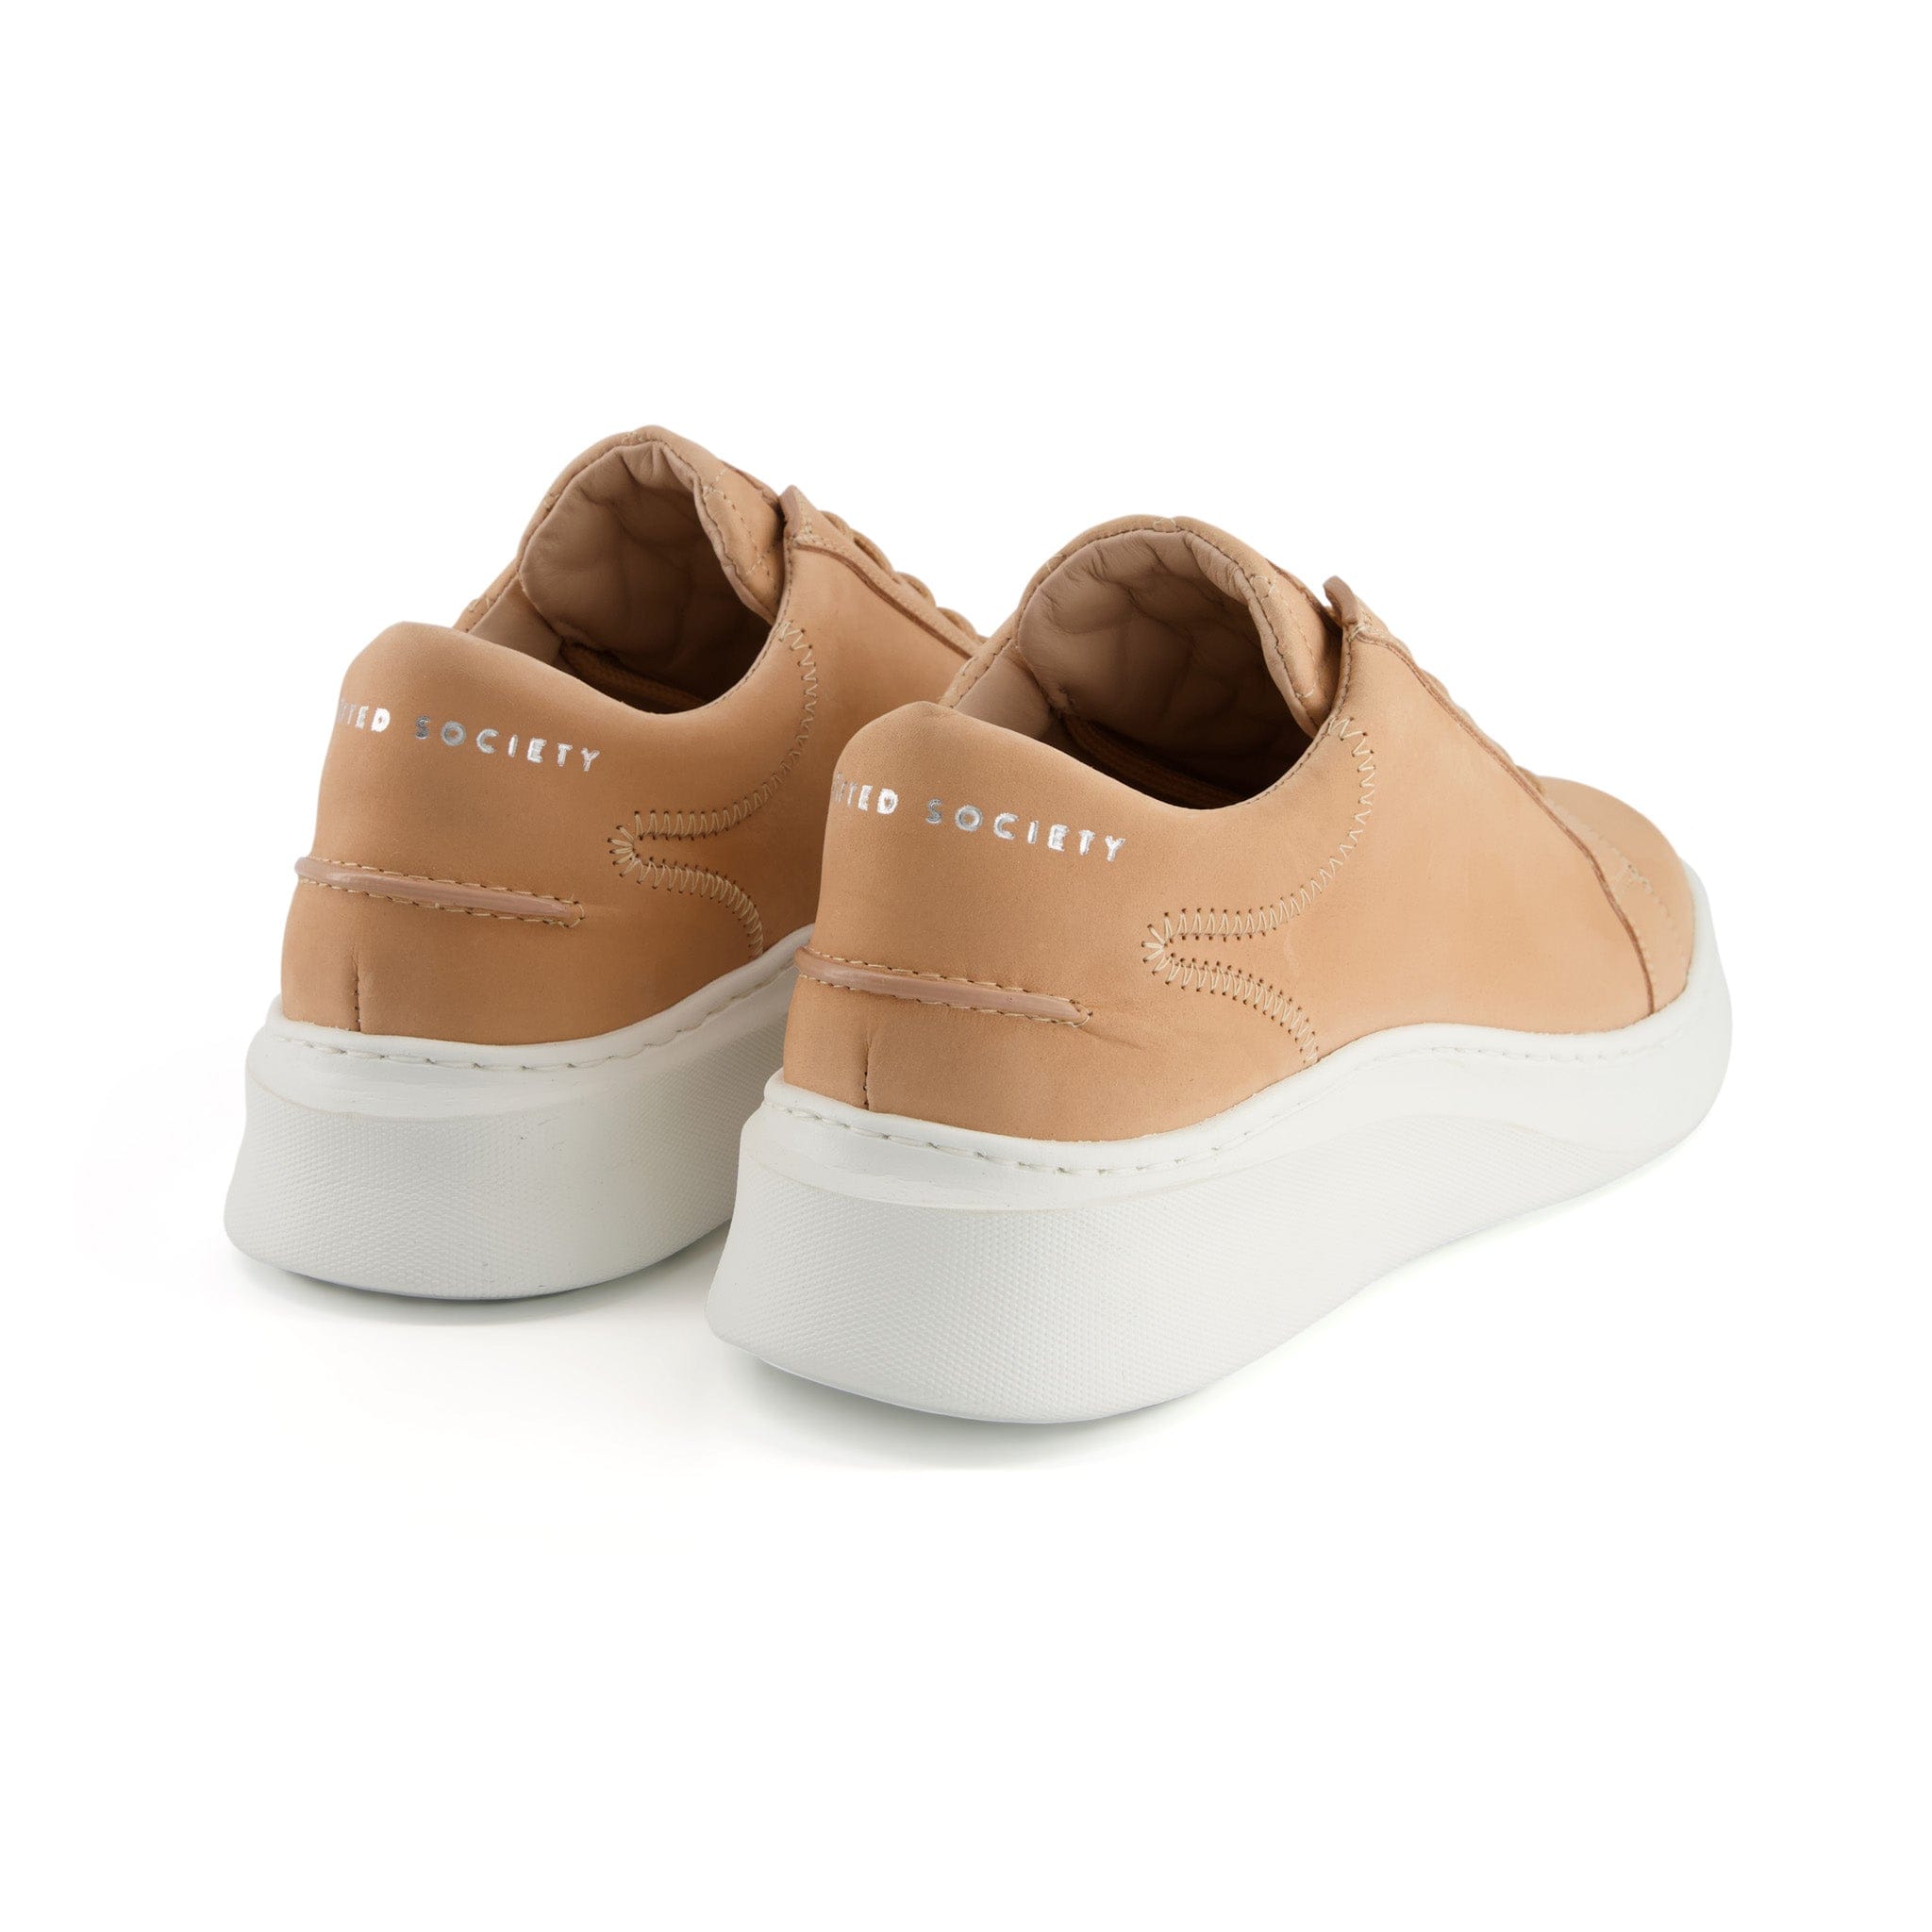 Matteo Low chunky Sneaker | All Tan Nubuck Leather | White Outsole | Made in Italy